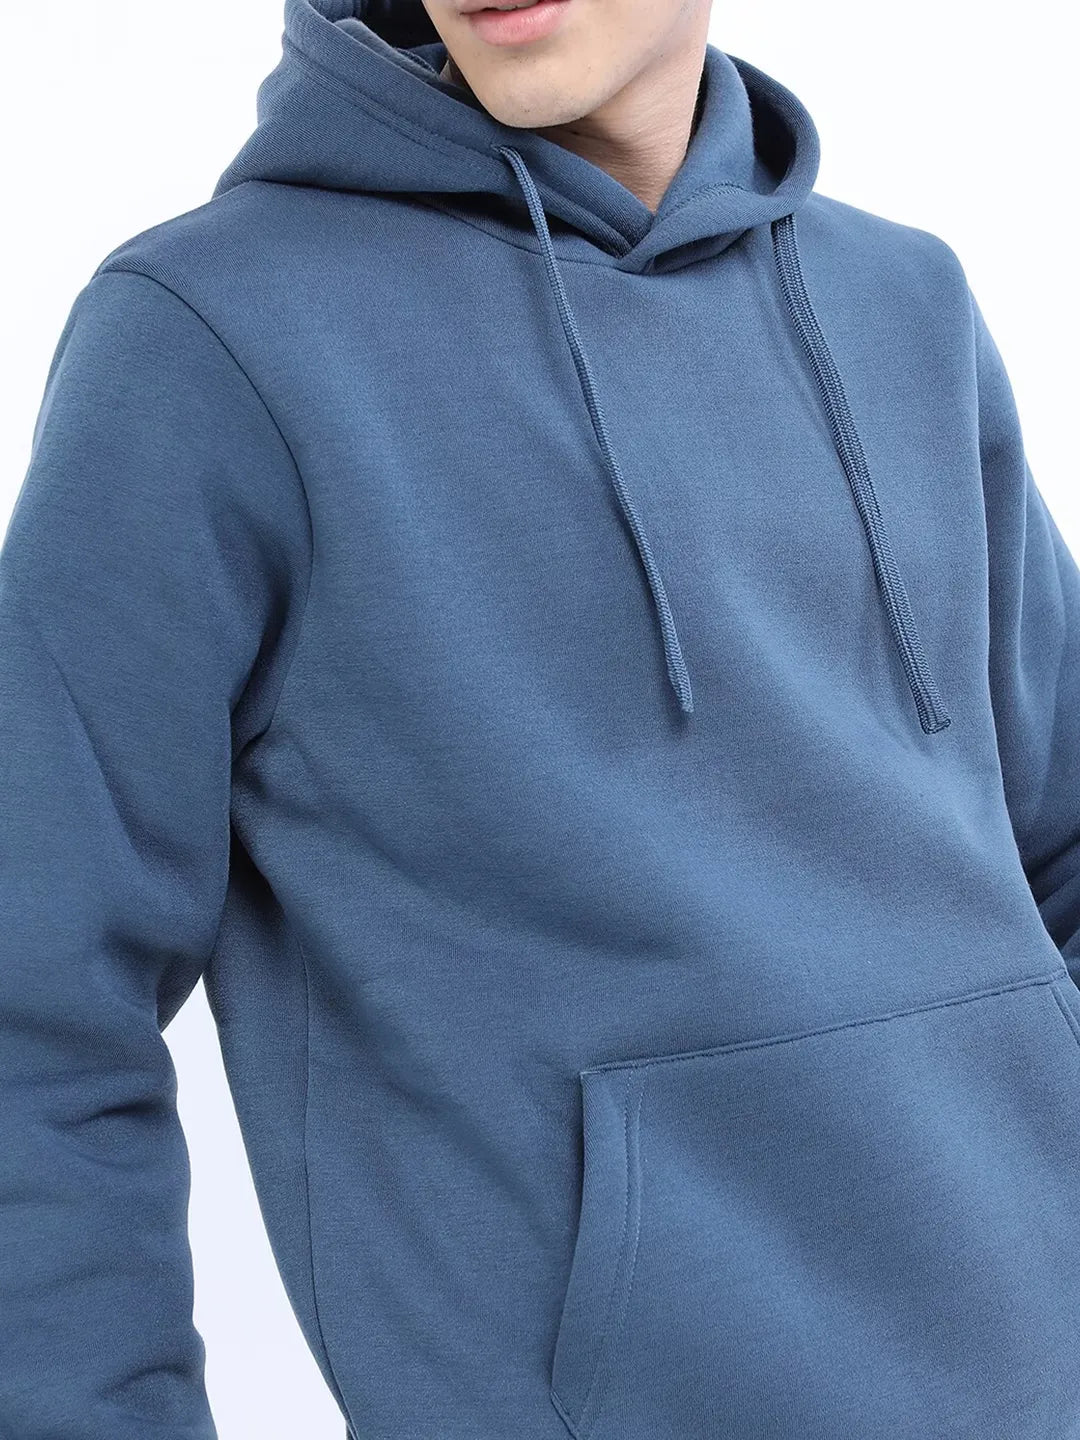 Casual Full Sleeves Cotton Hoodie Dark Blue Color For Men and Women (Unisex)